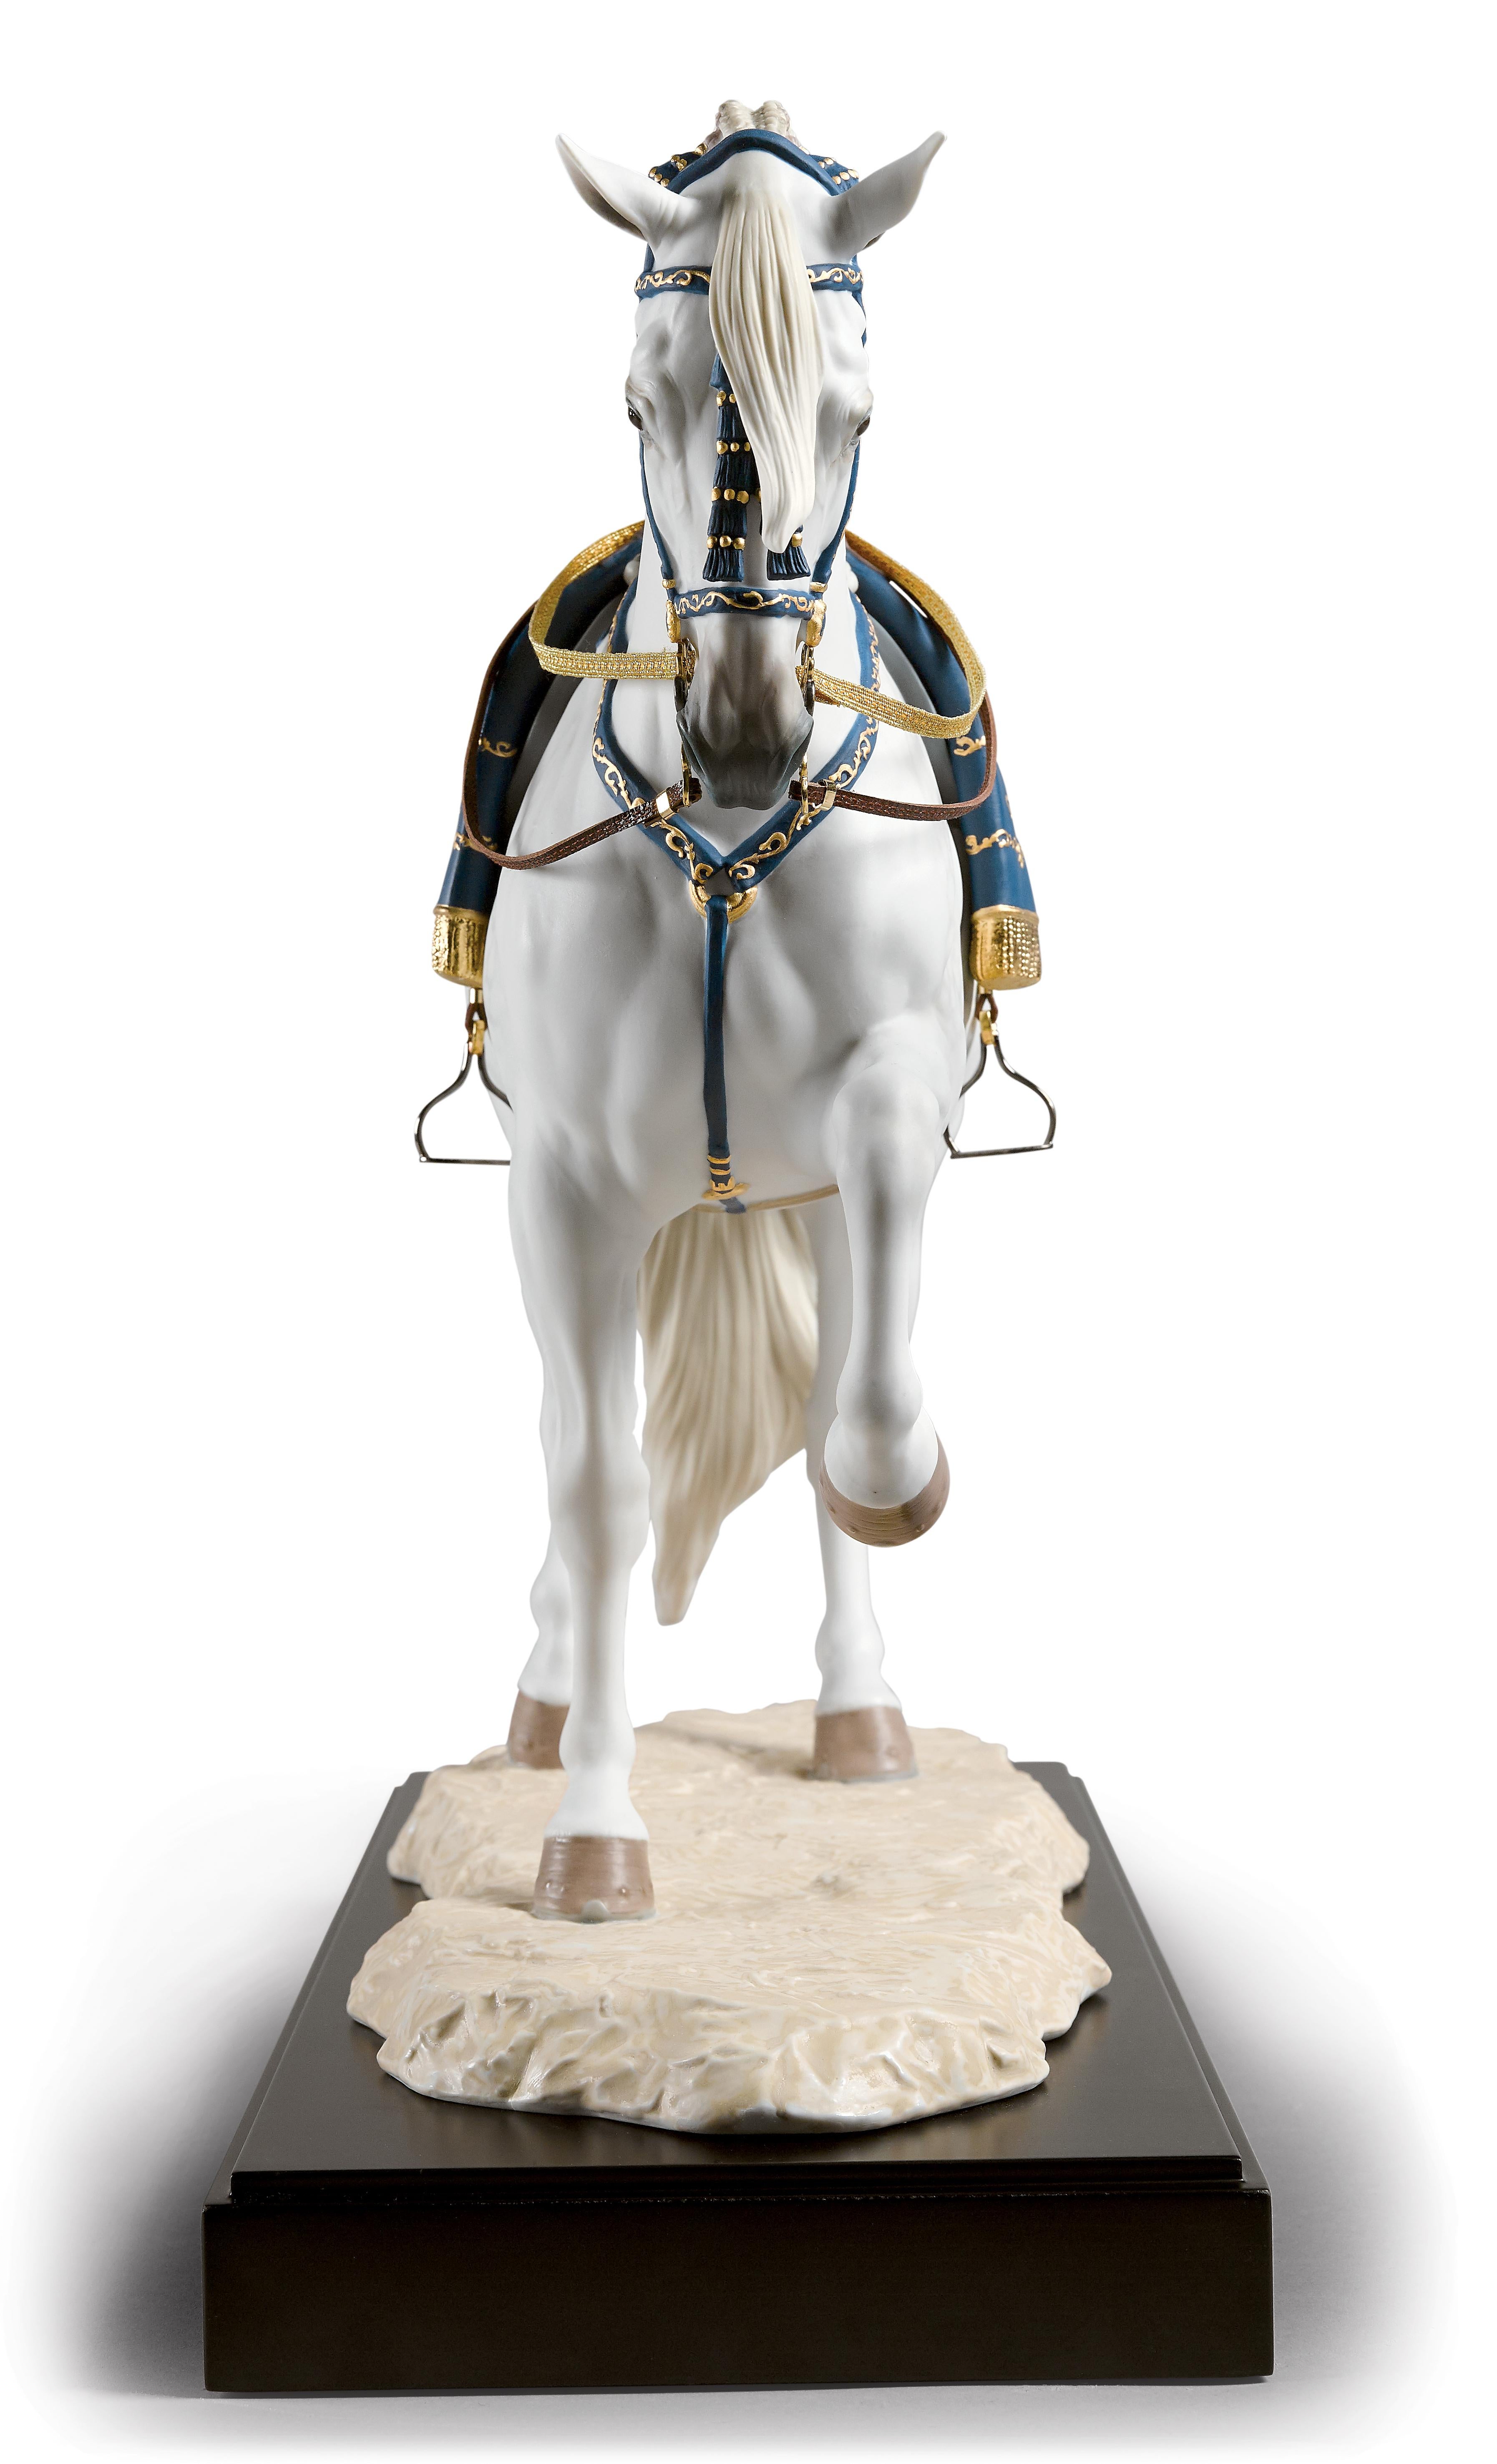 Limited edition sculpture of a Spanish horse trotting in position in matte porcelain, embellished with blue and gold lustre on the head, chest, saddle and blanket. Faithfully inspired by the examples at the Royal Andalusian School of Equestrian Art,